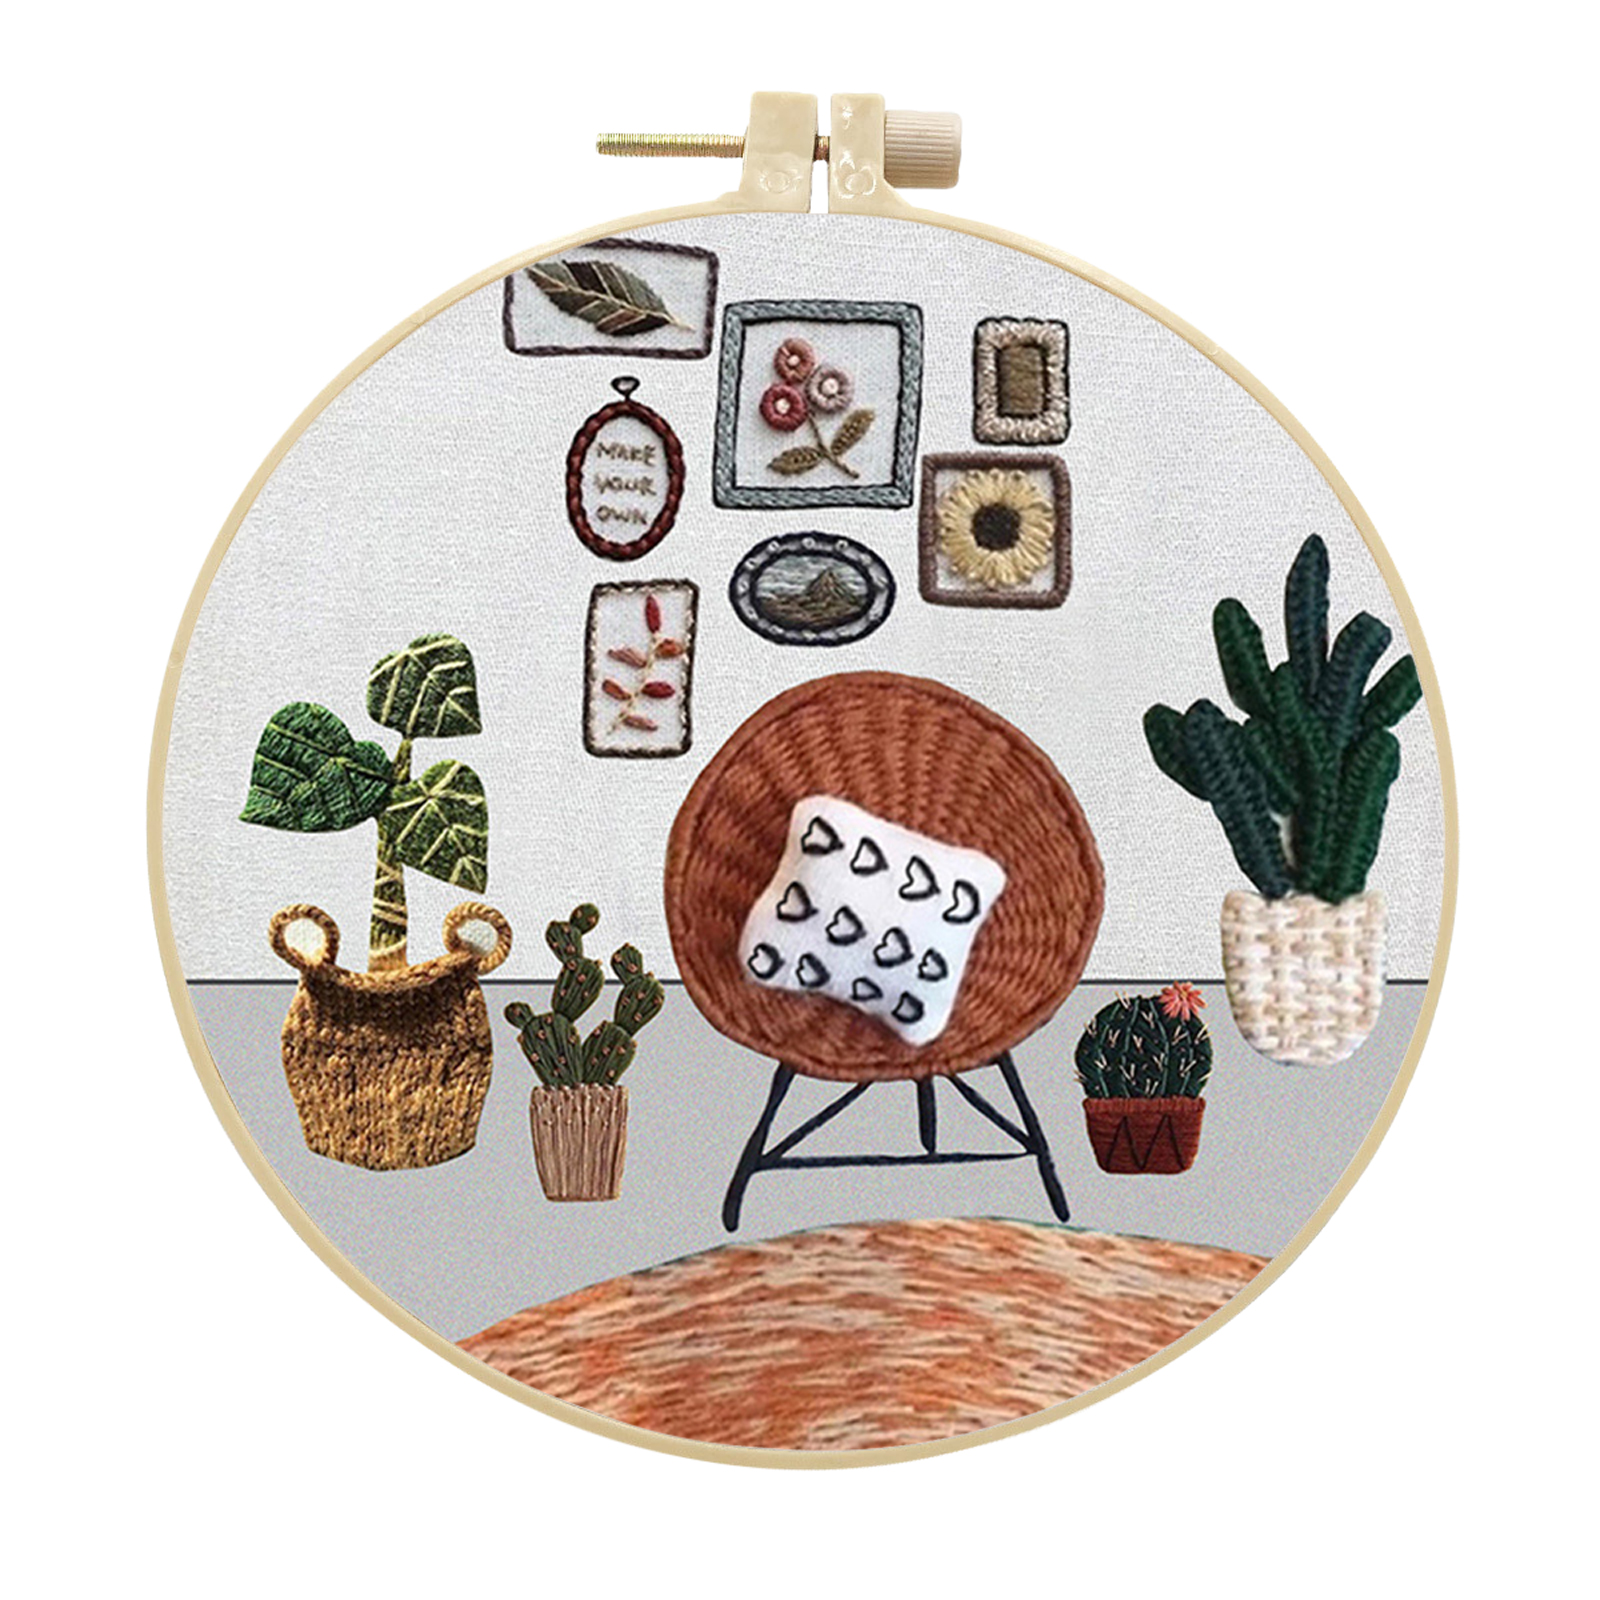 Handmade Embroidery Kit Cross stitch kit for Adult Beginner - Cozy Bedroom Pattern